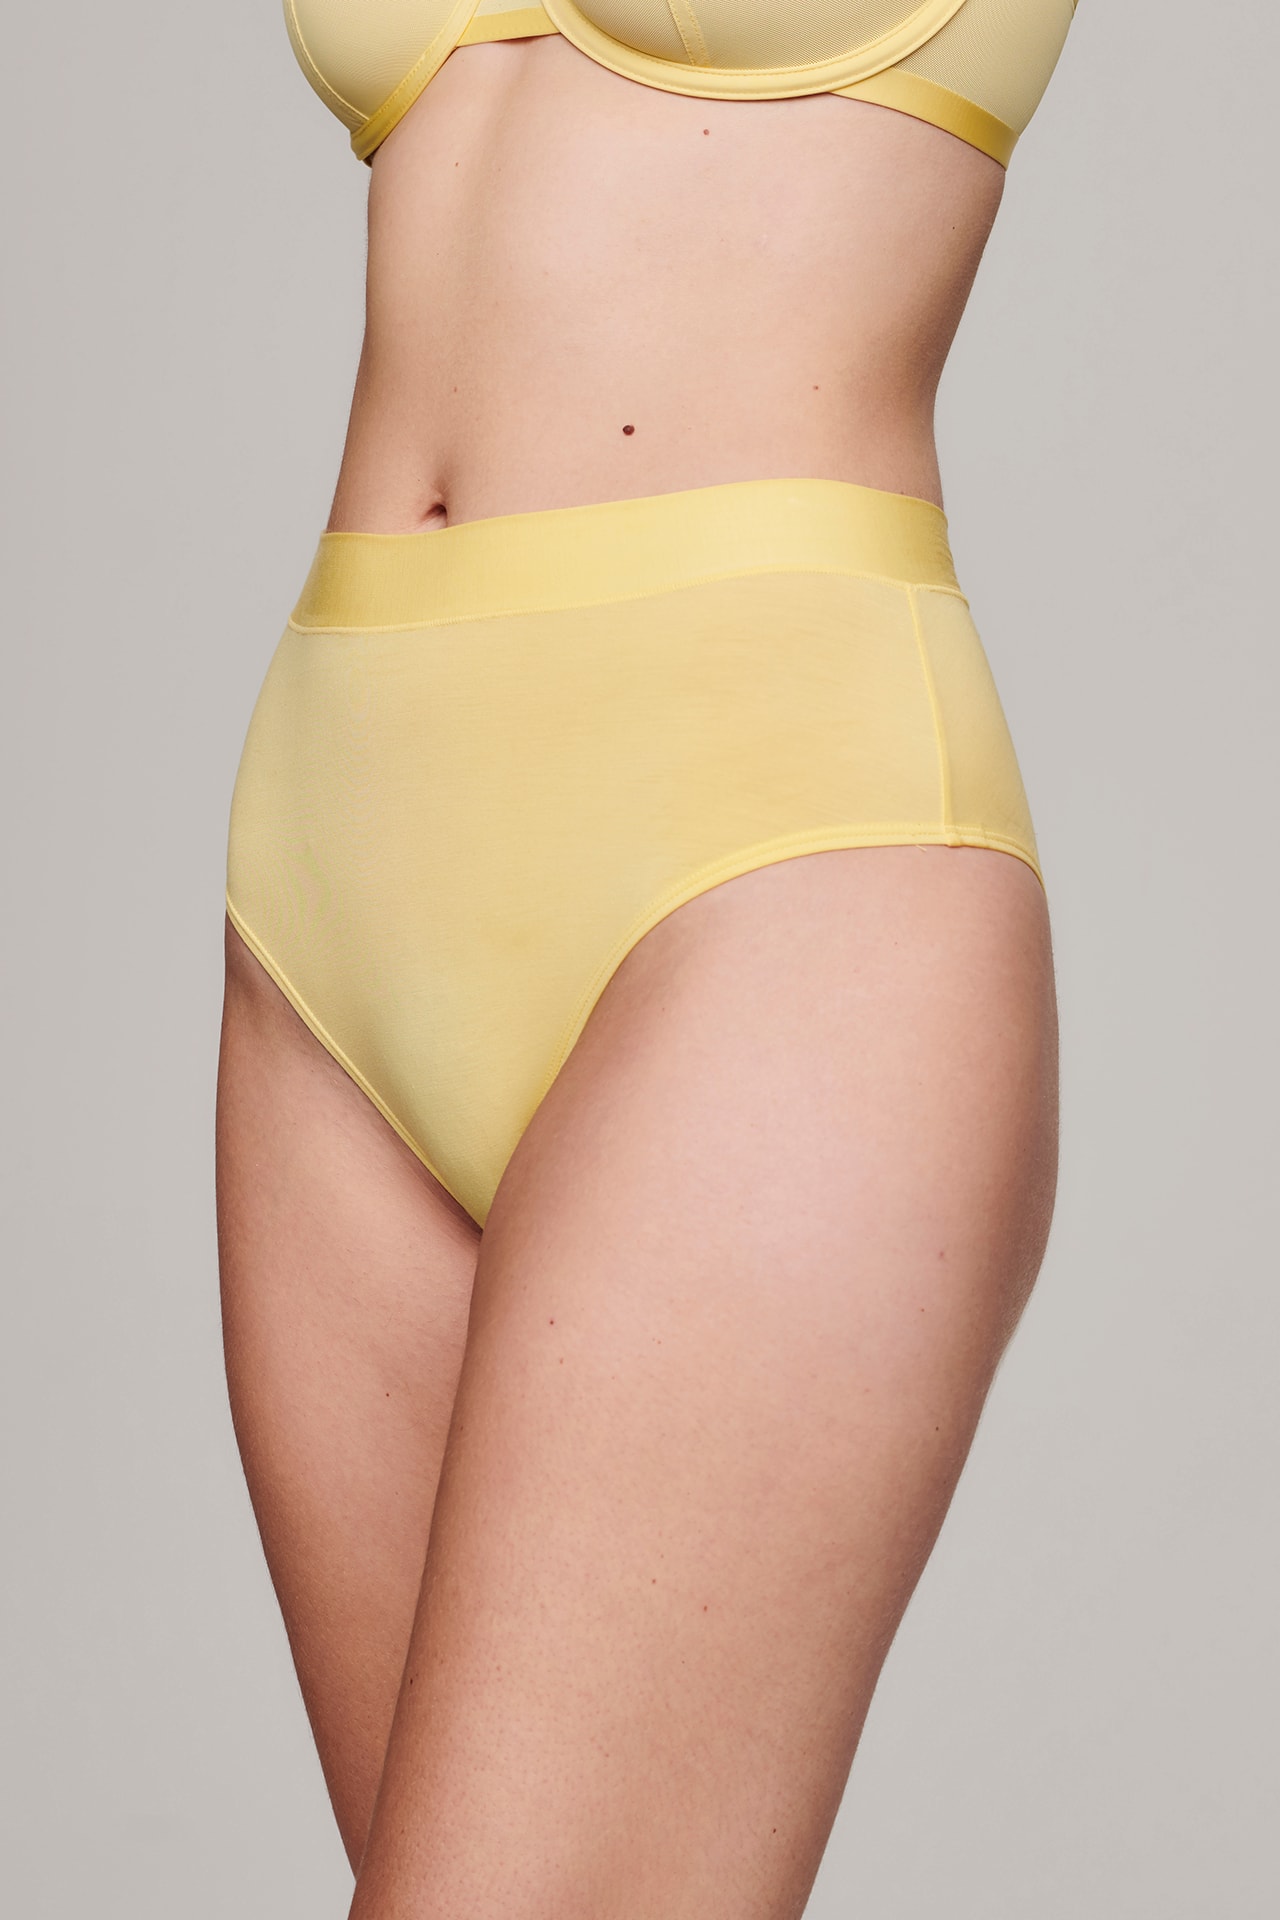 CUUP Introduces New Golden Hour-Inspired Colorways for Its Underwear -  Yahoo Sports